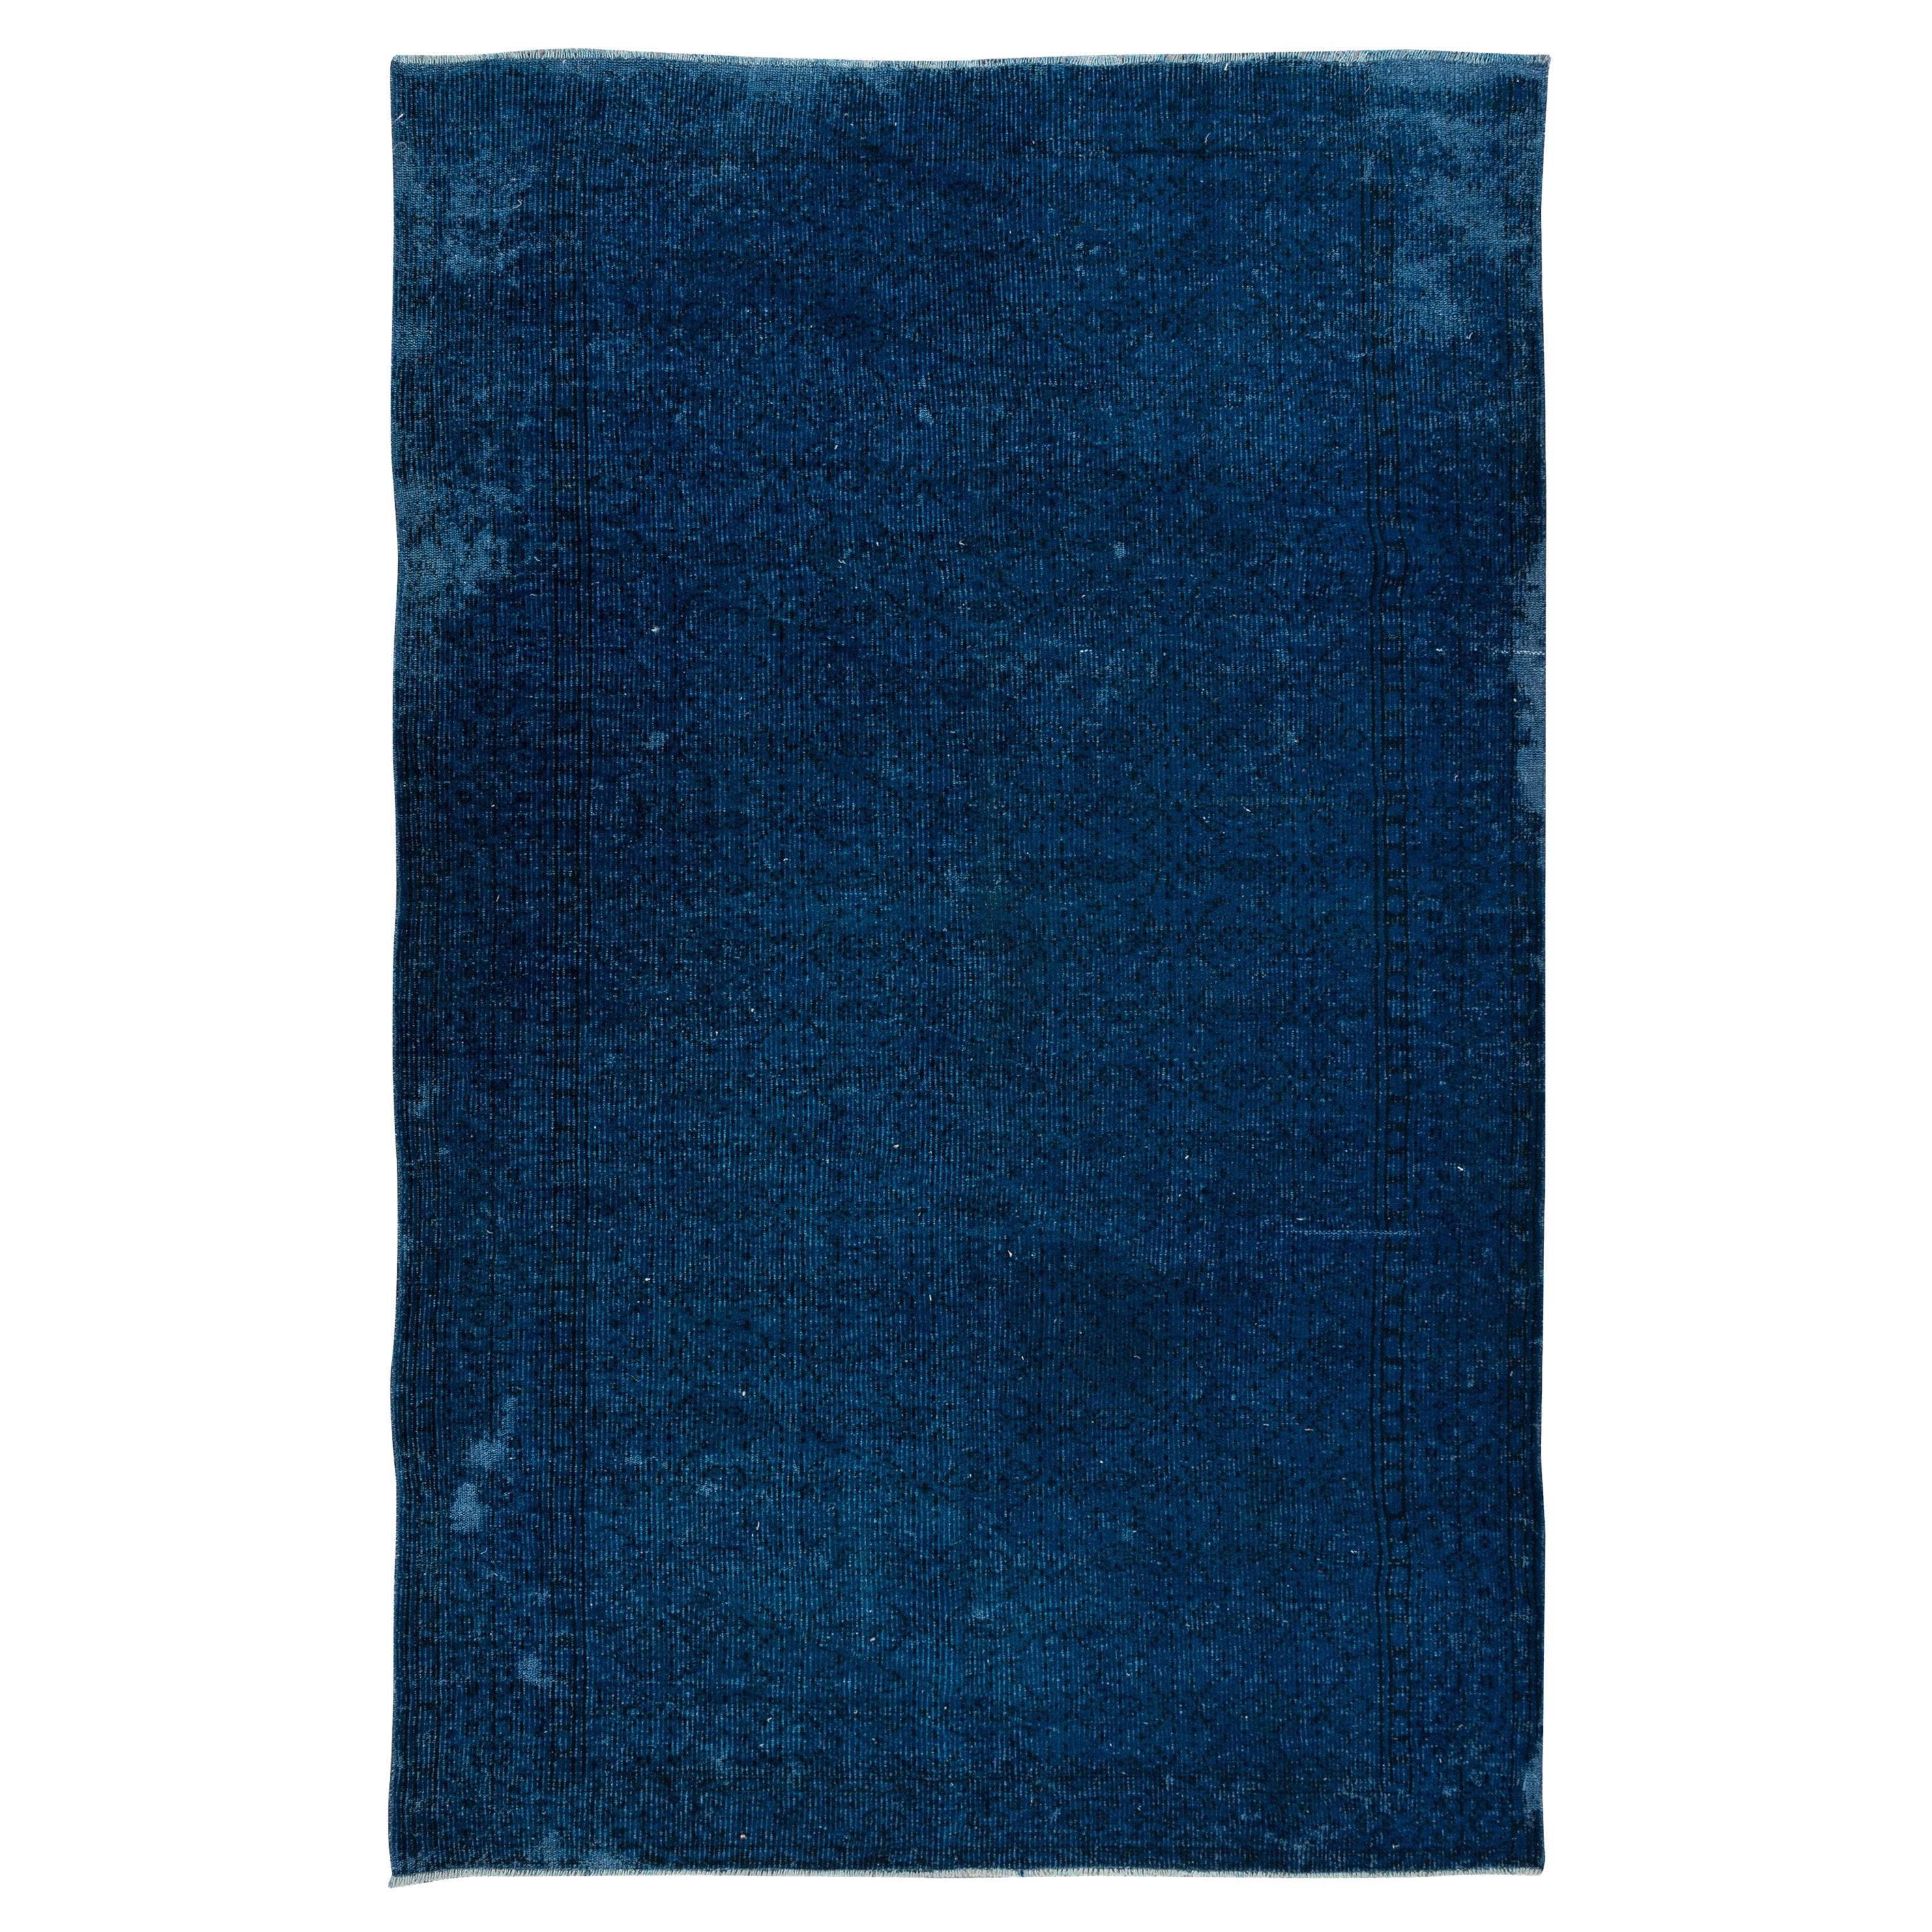 5.8x9.2 Ft Modern Living Room Carpet in Dark Blue, Hand Knotted Turkish Area Rug For Sale